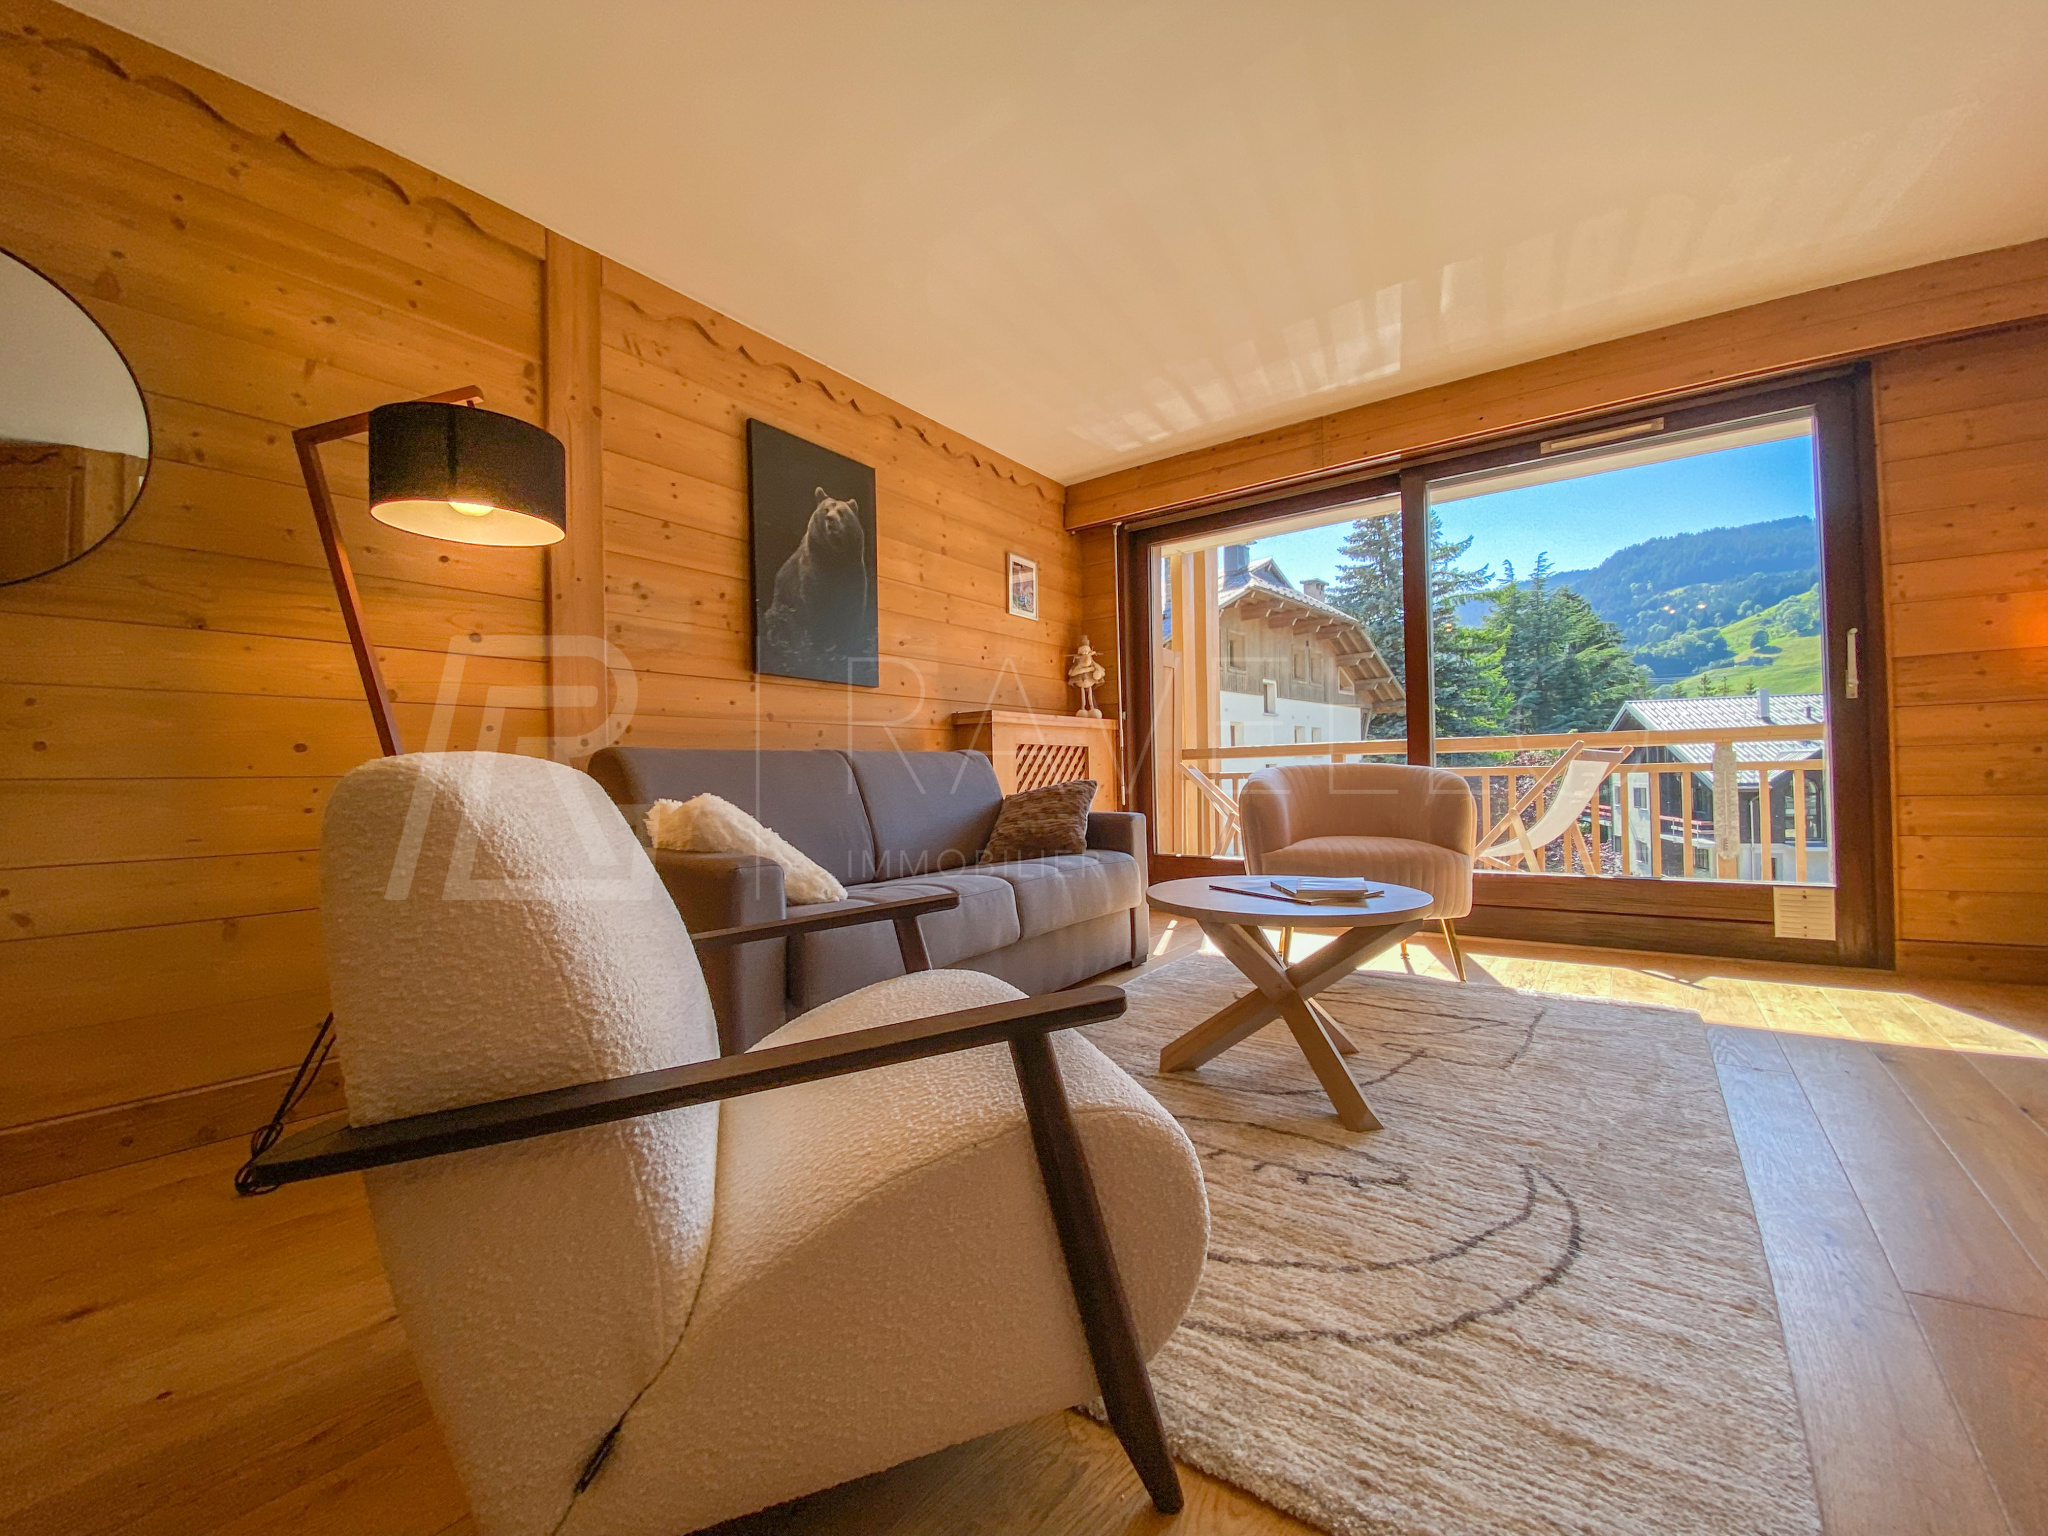 2 ROOMS 46.57 M2 MEGÈVE HEART OF VILLAGE - T2 APARTMENT IN THE PEDESTRIAN ZONE OF MEGÈVE. Accommodation in Megeve